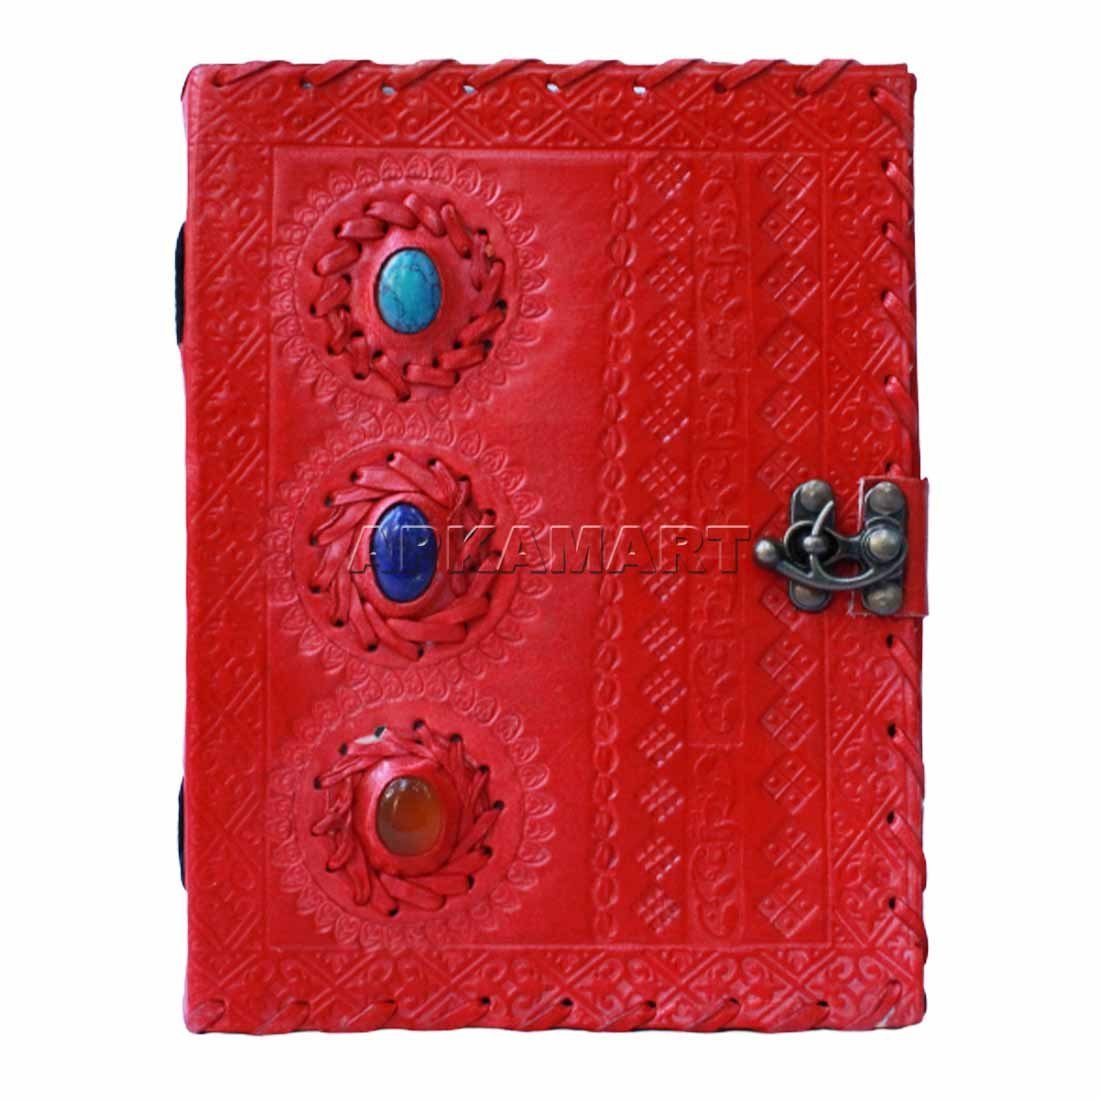 Personal Diary | Leather Journal - for Men & Women -8 Inch - ApkaMart